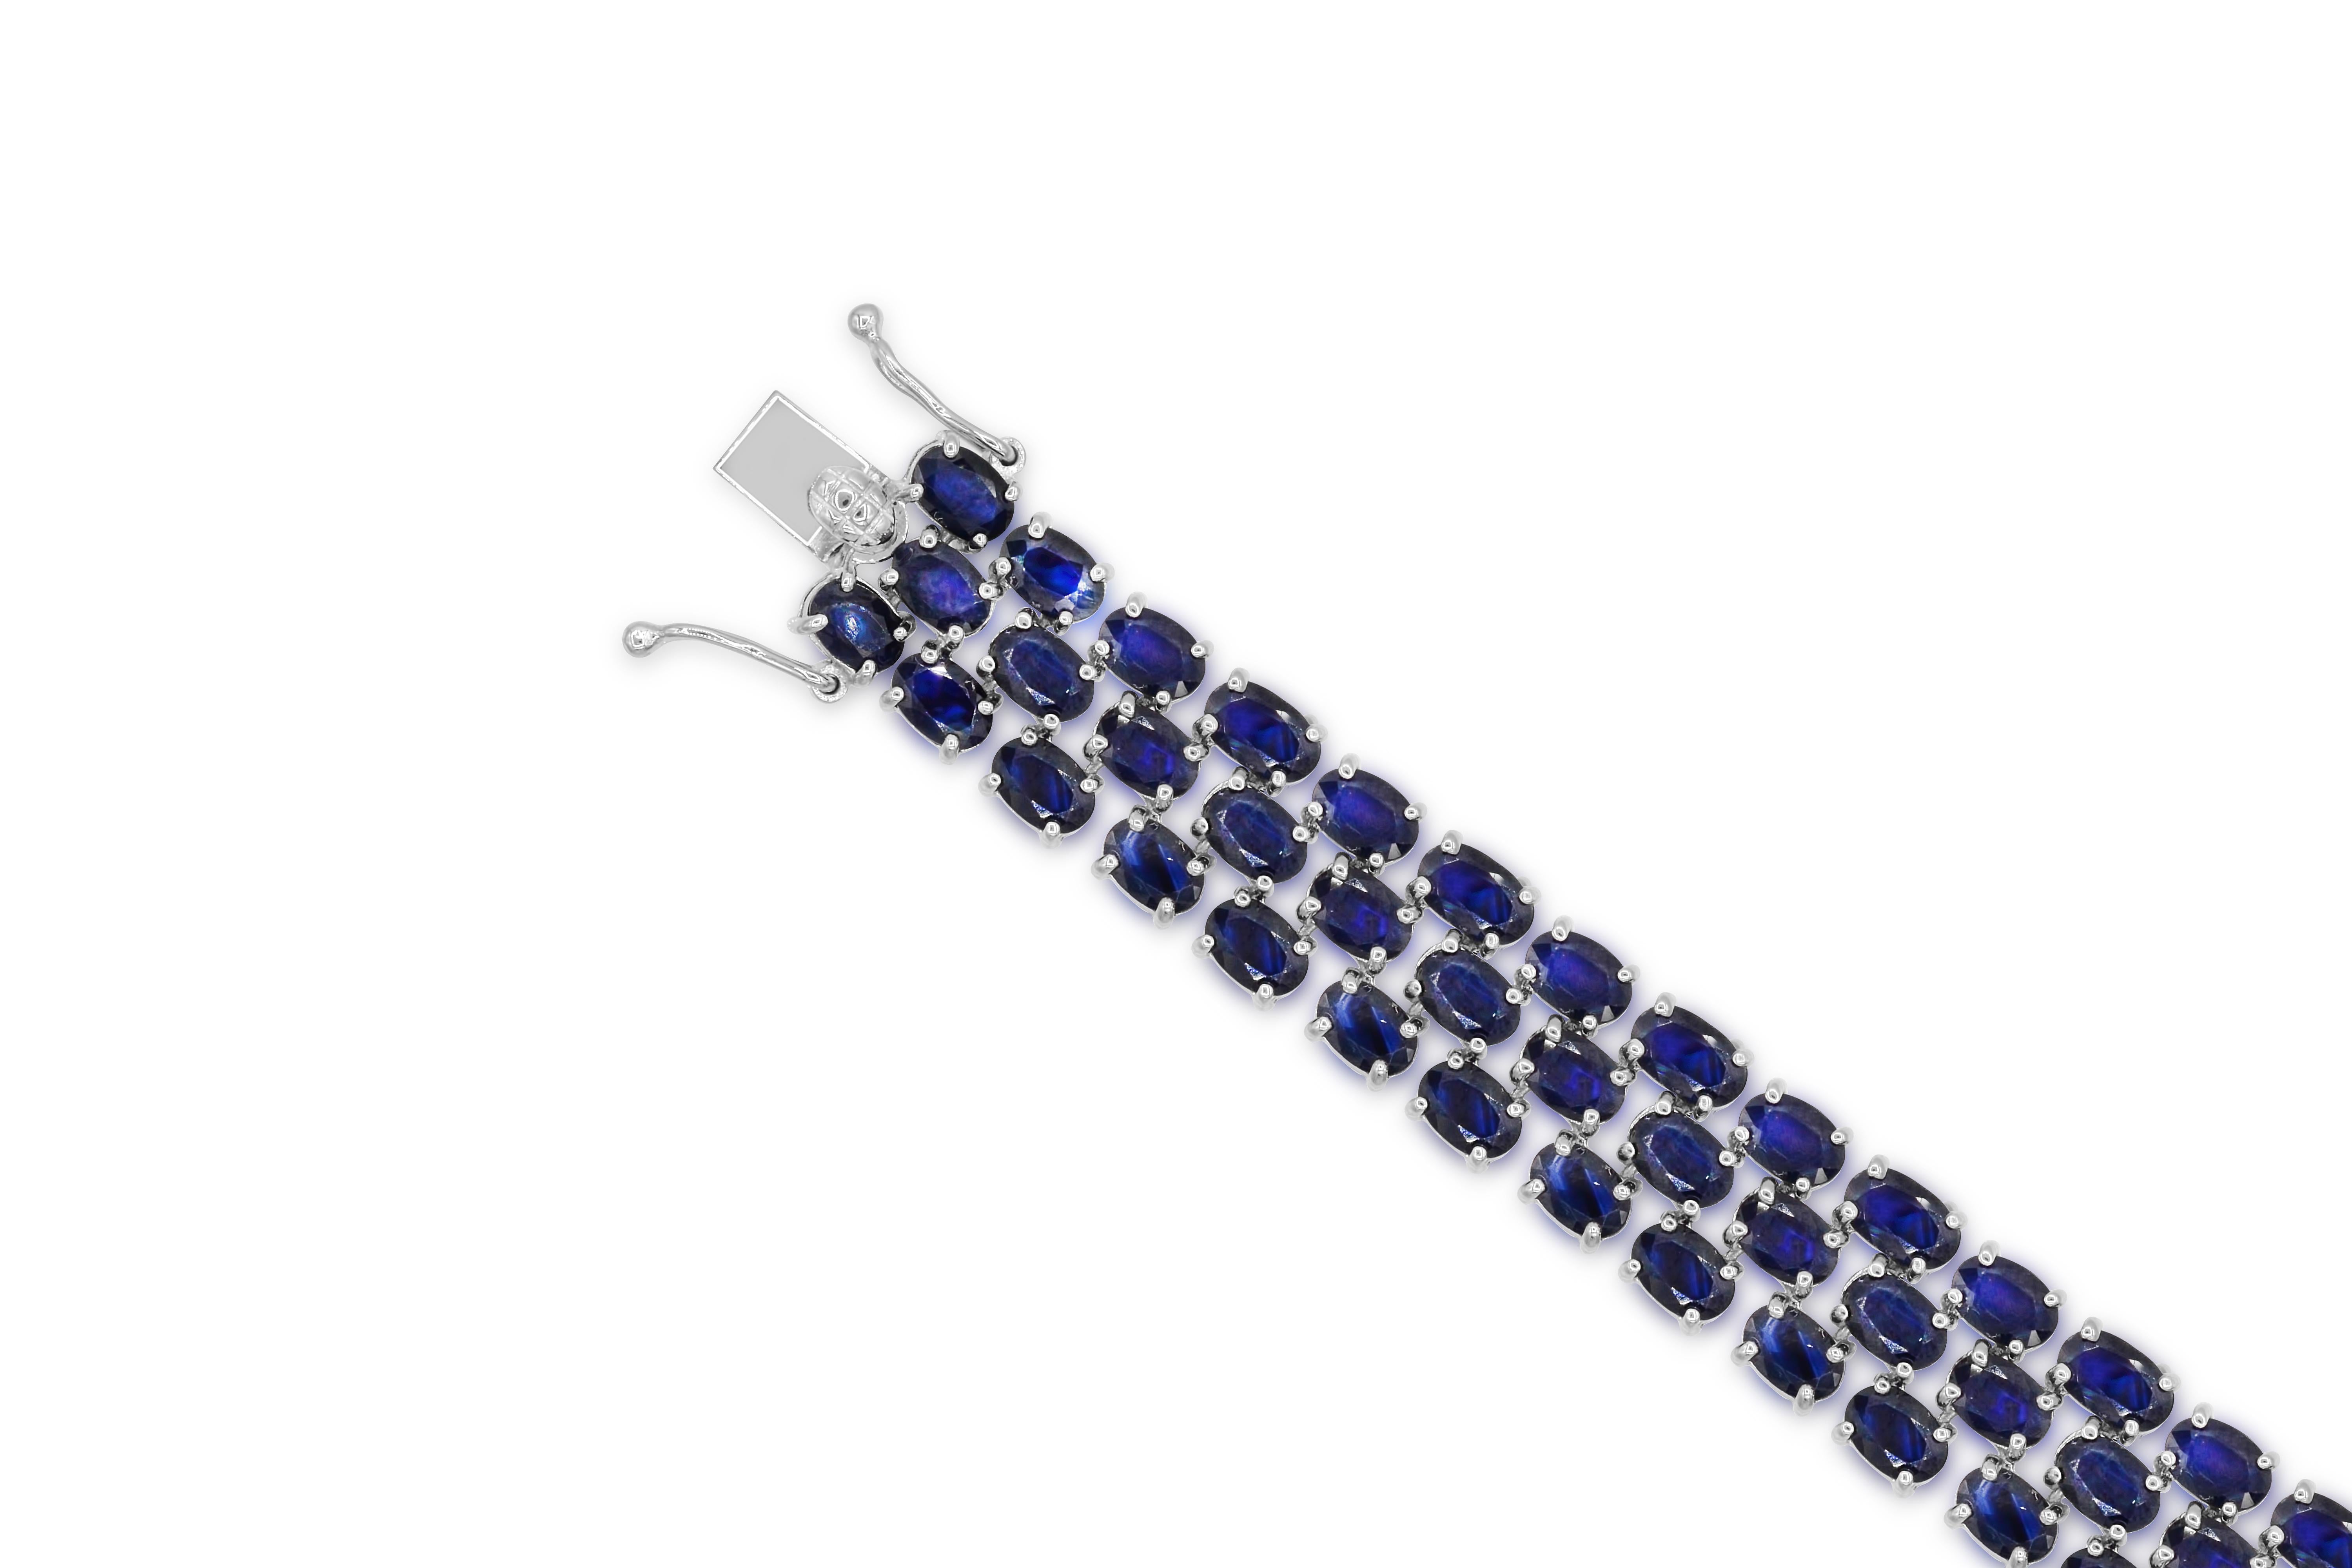 Indulge in the elegance of our 46-1/5 Carat Oval Genuine Sapphire Tennis Bracelet in Sterling Silver. Crafted with meticulous attention to detail, this bracelet boasts a stunning style of 77 oval genuine sapphire gemstones. The silver tone prong